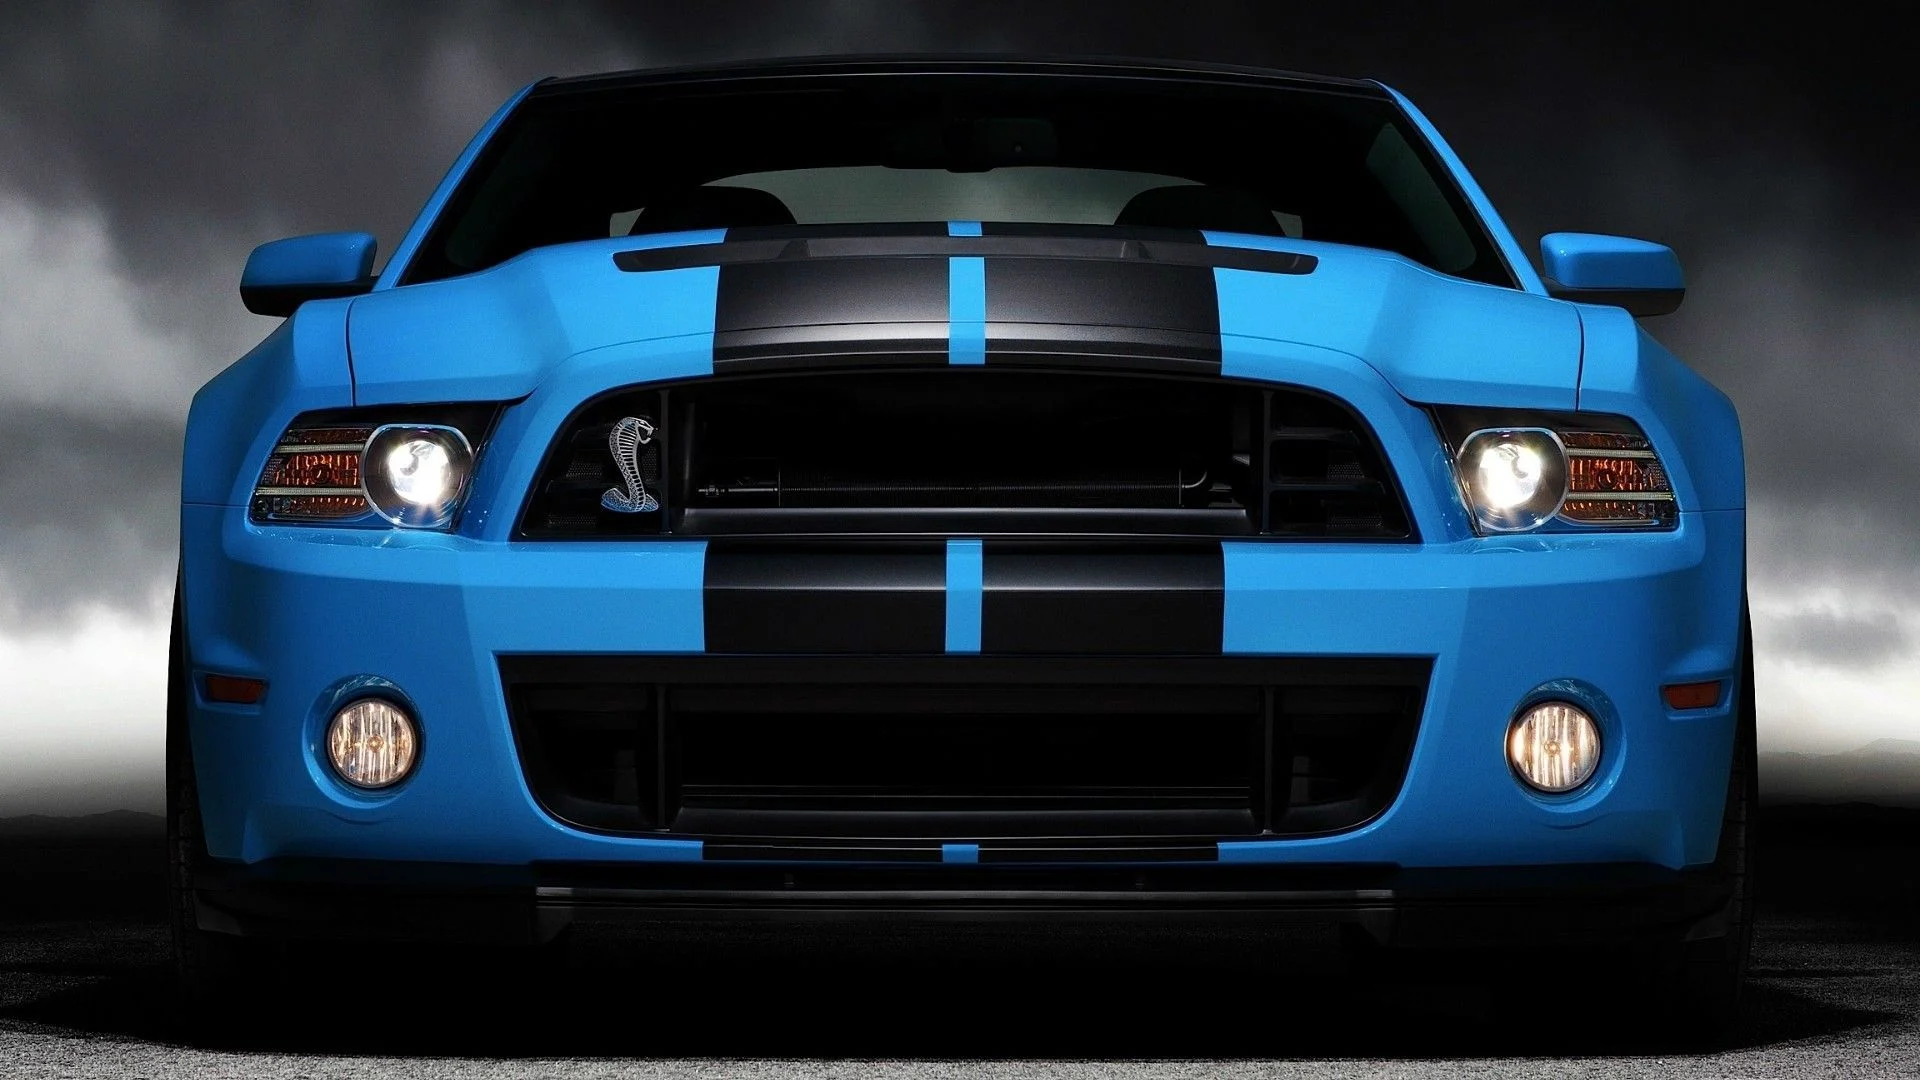 1920x1080 Ford Mustang Blue Laptop HD Wallpapers Top Free Ford Mustang Blue Laptop HD Backgrounds